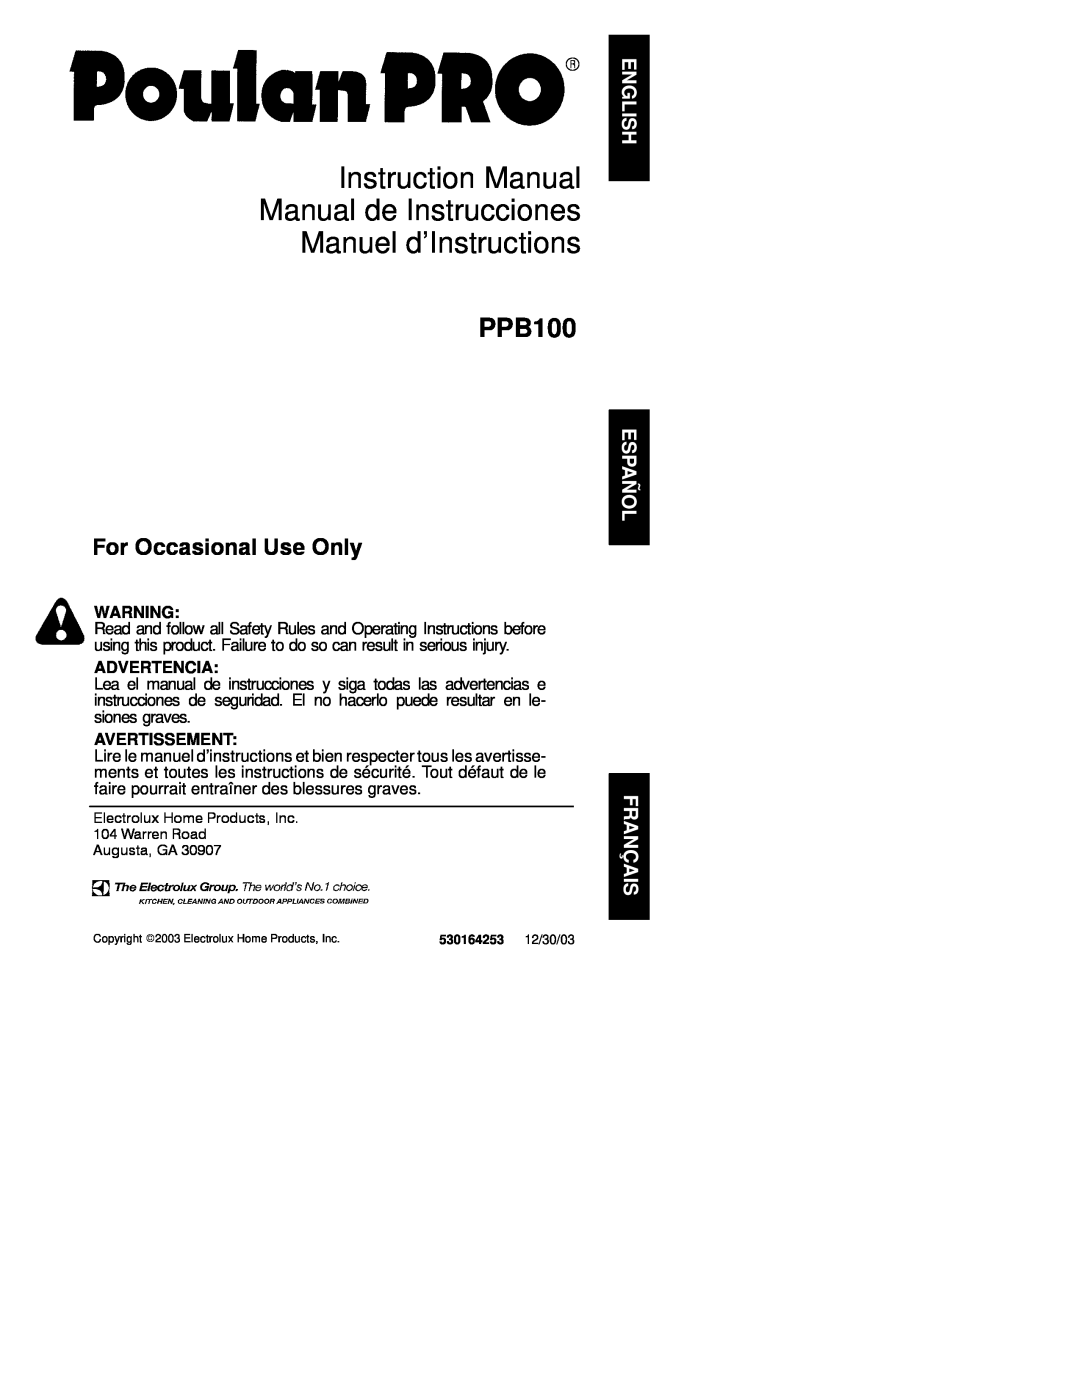 Poulan PPB100 instruction manual Advertencia, Avertissement, Manuel d’Instructions, For Occasional Use Only 